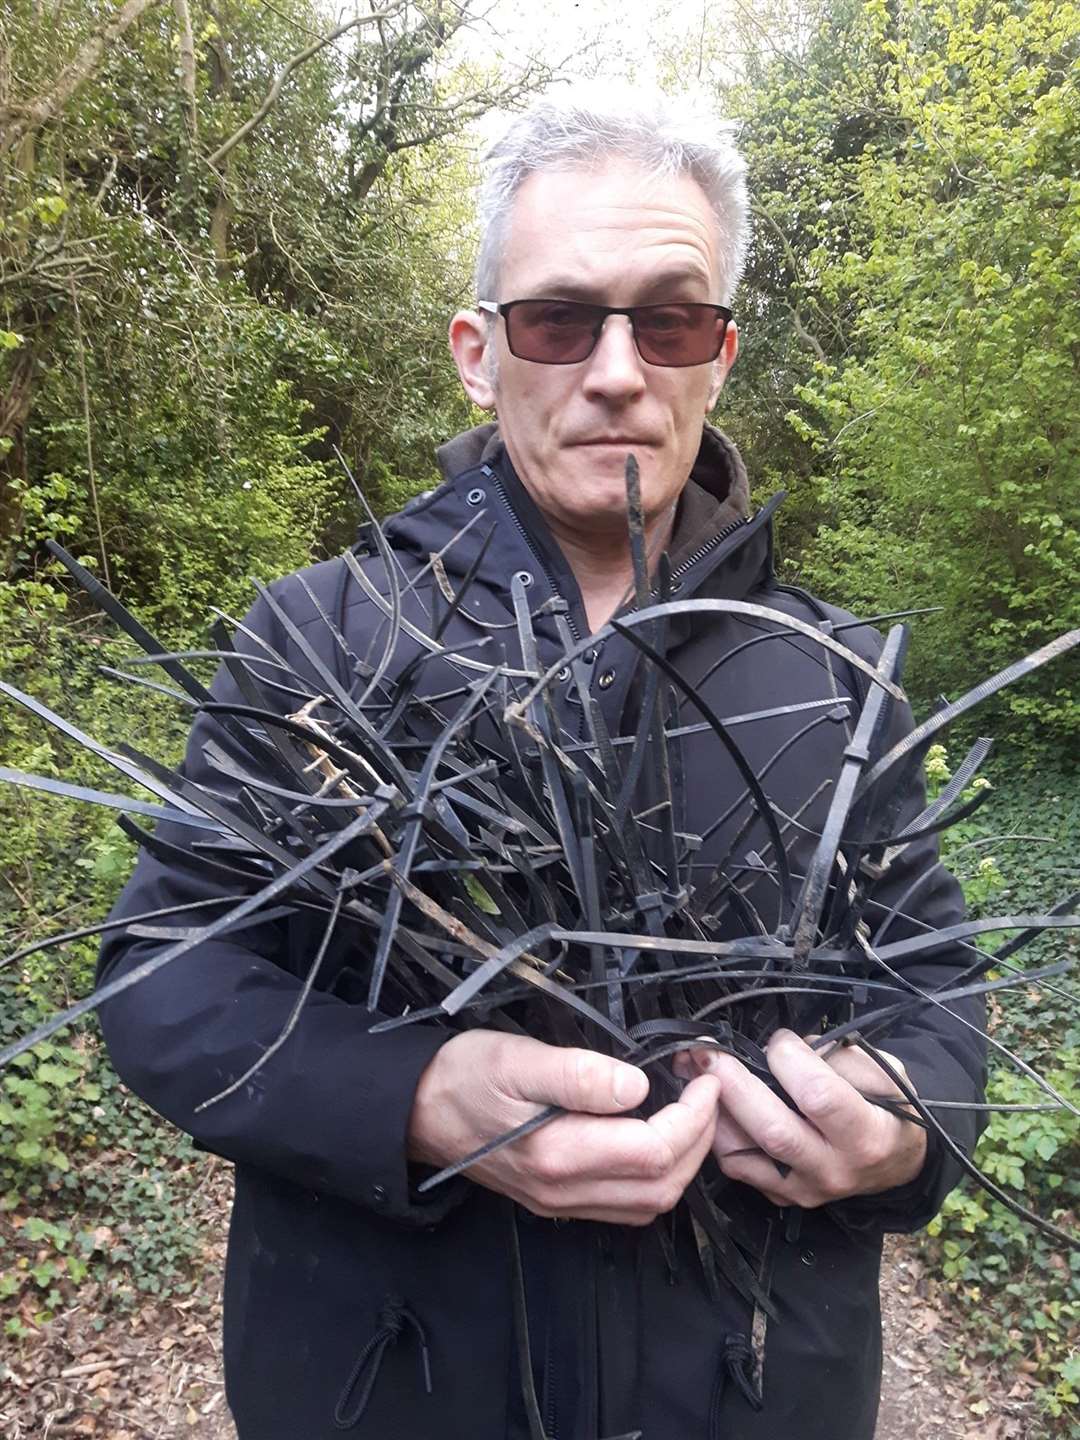 Plastic cable ties collected by Chalk resident Russell Palmer around the Seven Fields site which has been tested by workers for the Lower Thames Crossing project. Picture: Russell Palmer/Facebook